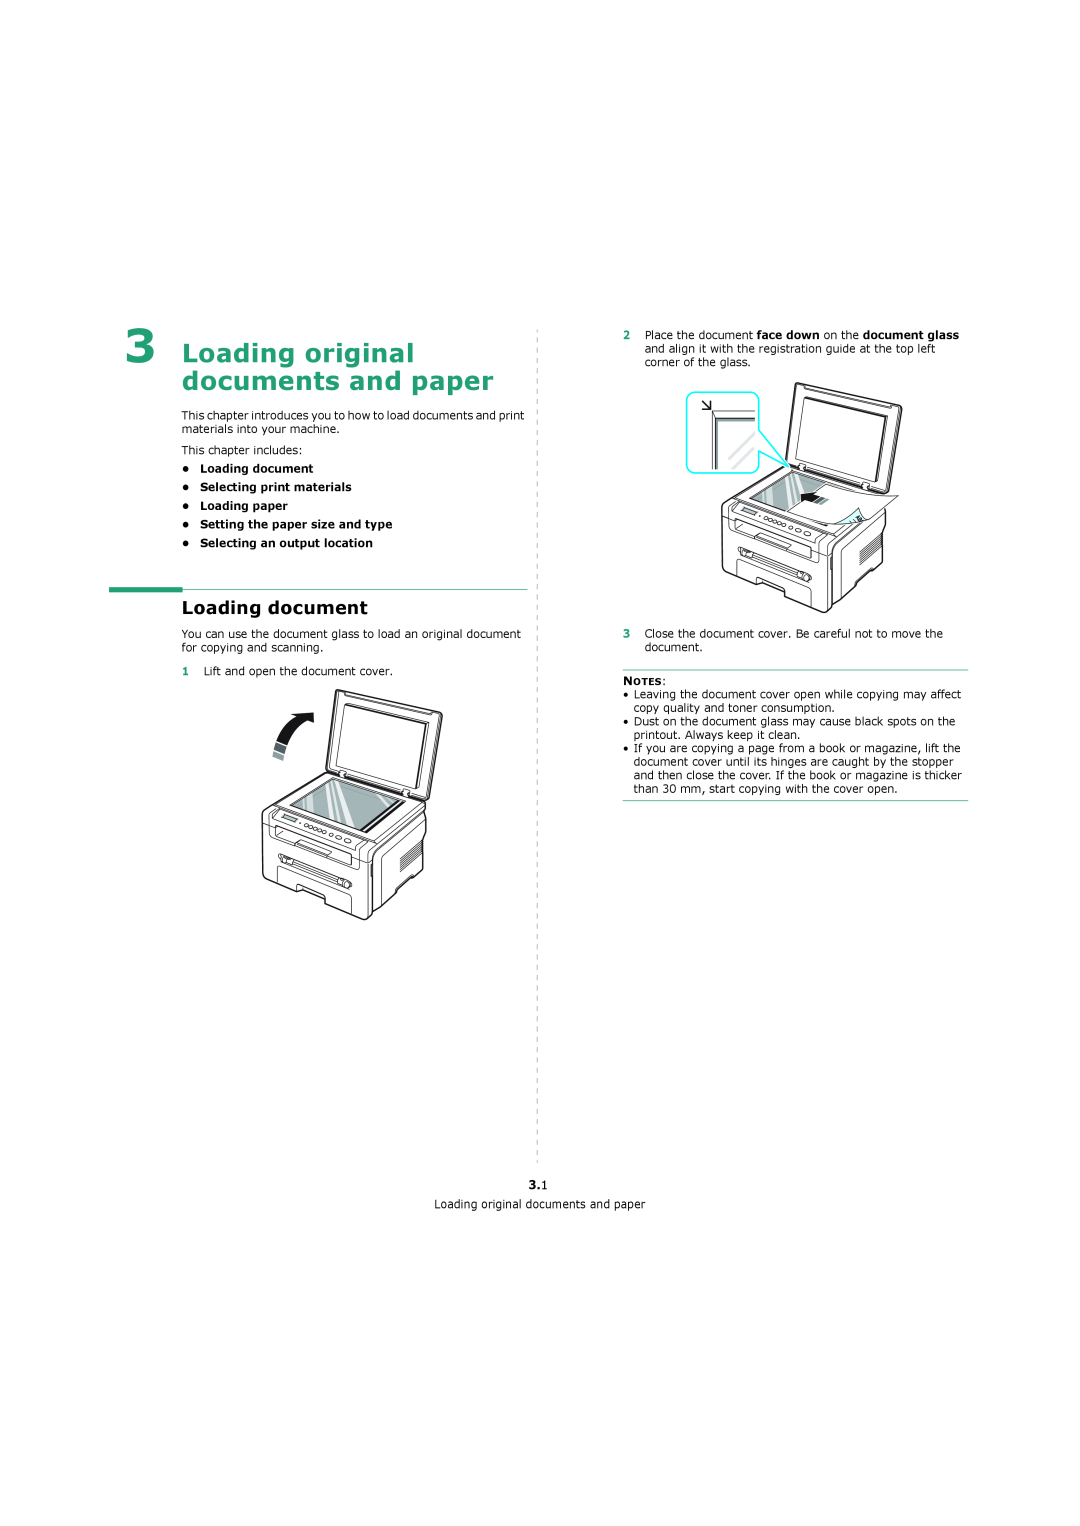 Xerox 3119 manual Loading original documents and paper, •Loading document •Selecting print materials 